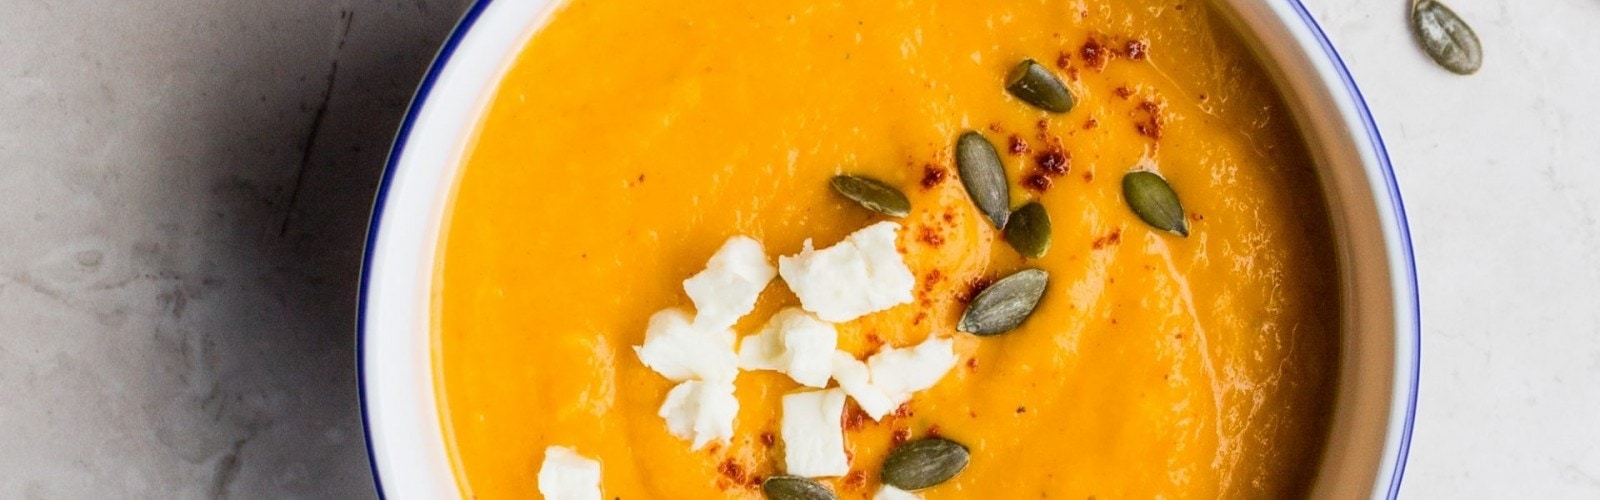 A bowl of orange carrot soup on a kitchen counter